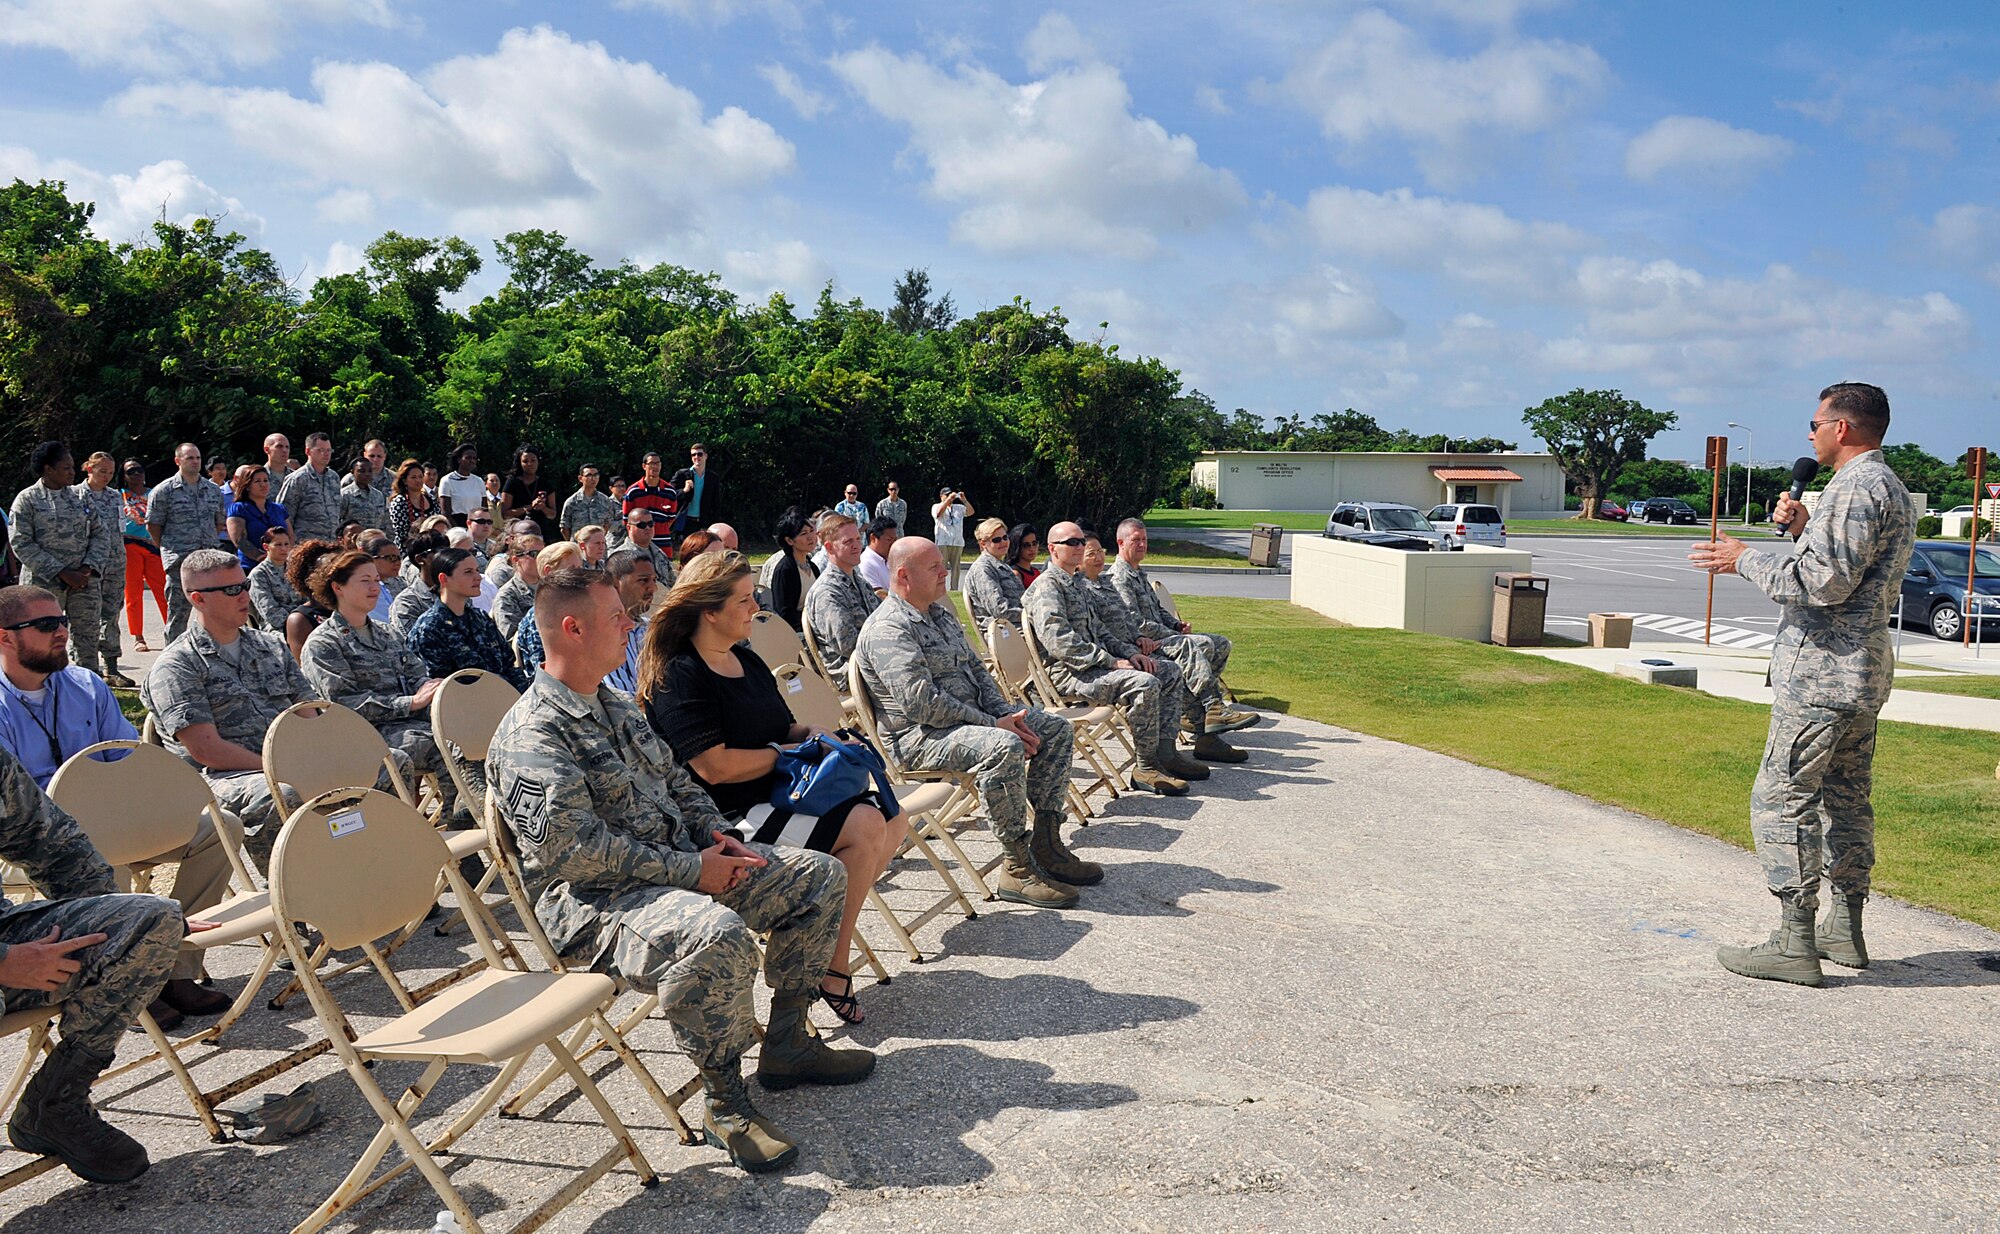 U.S. Air Force Brig. Gen. Barry Cornish, 18th Wing commander, expresses his appreciation to the people involved in the relocation of the Mental Health Clinic during an opening ceremony on Kadena Air Base, Japan, July 1, 2015. Approximately 60 people attended the ribbon cutting ceremony to celebrate the opening of the facility that services 16,000 joint service beneficiaries on Okinawa. (U.S. Air Force photo by Naoto Anazawa)